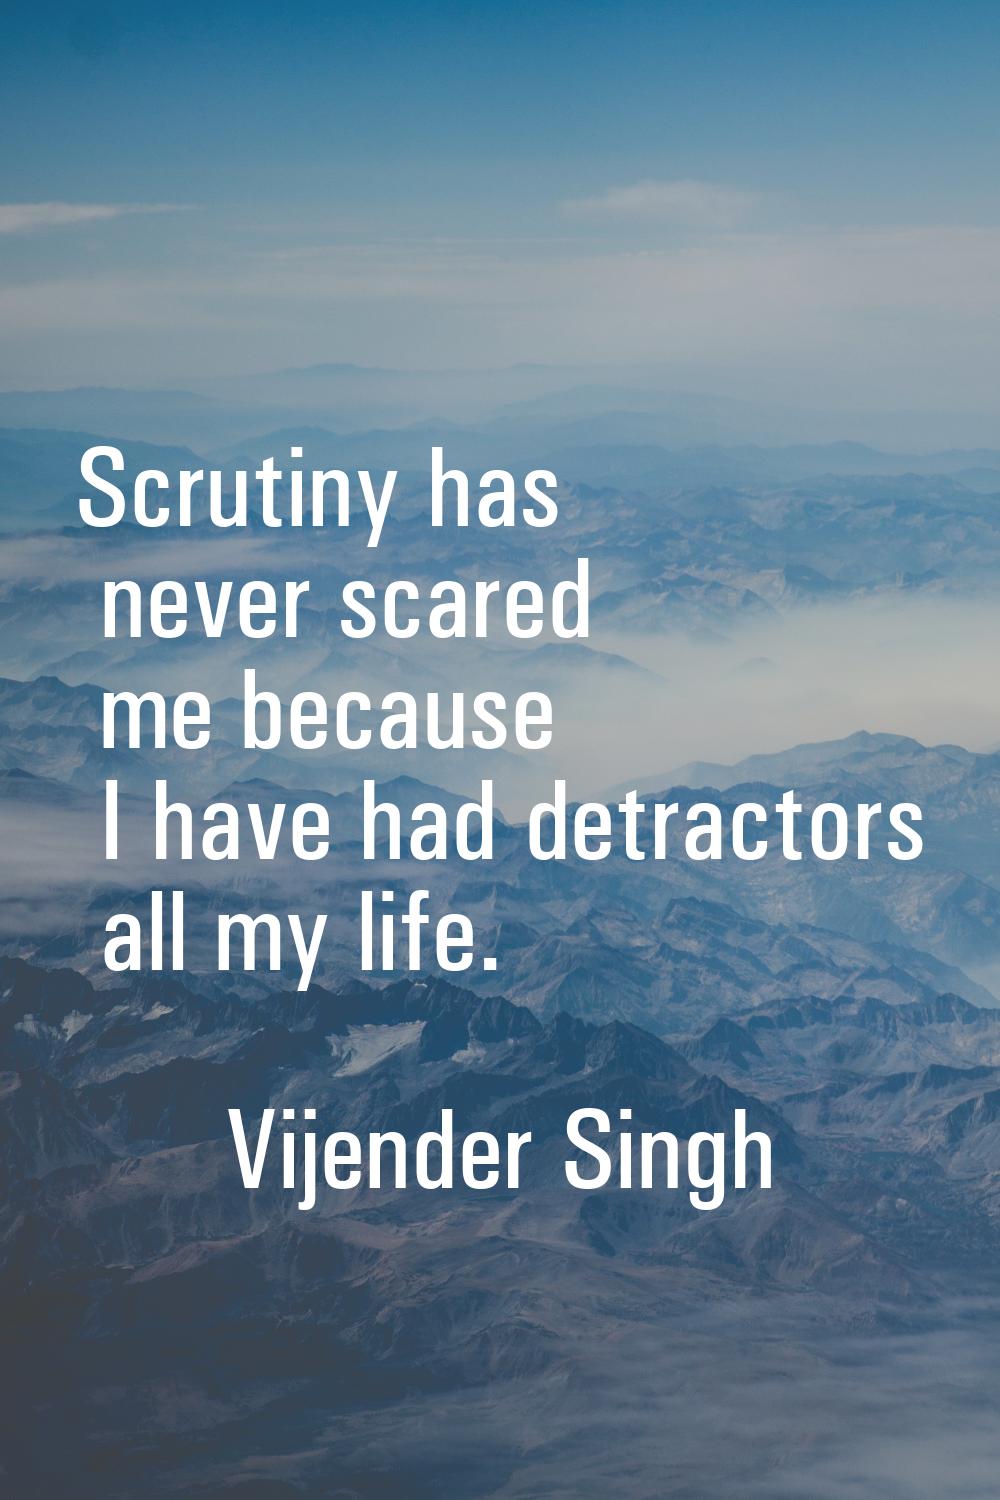 Scrutiny has never scared me because I have had detractors all my life.